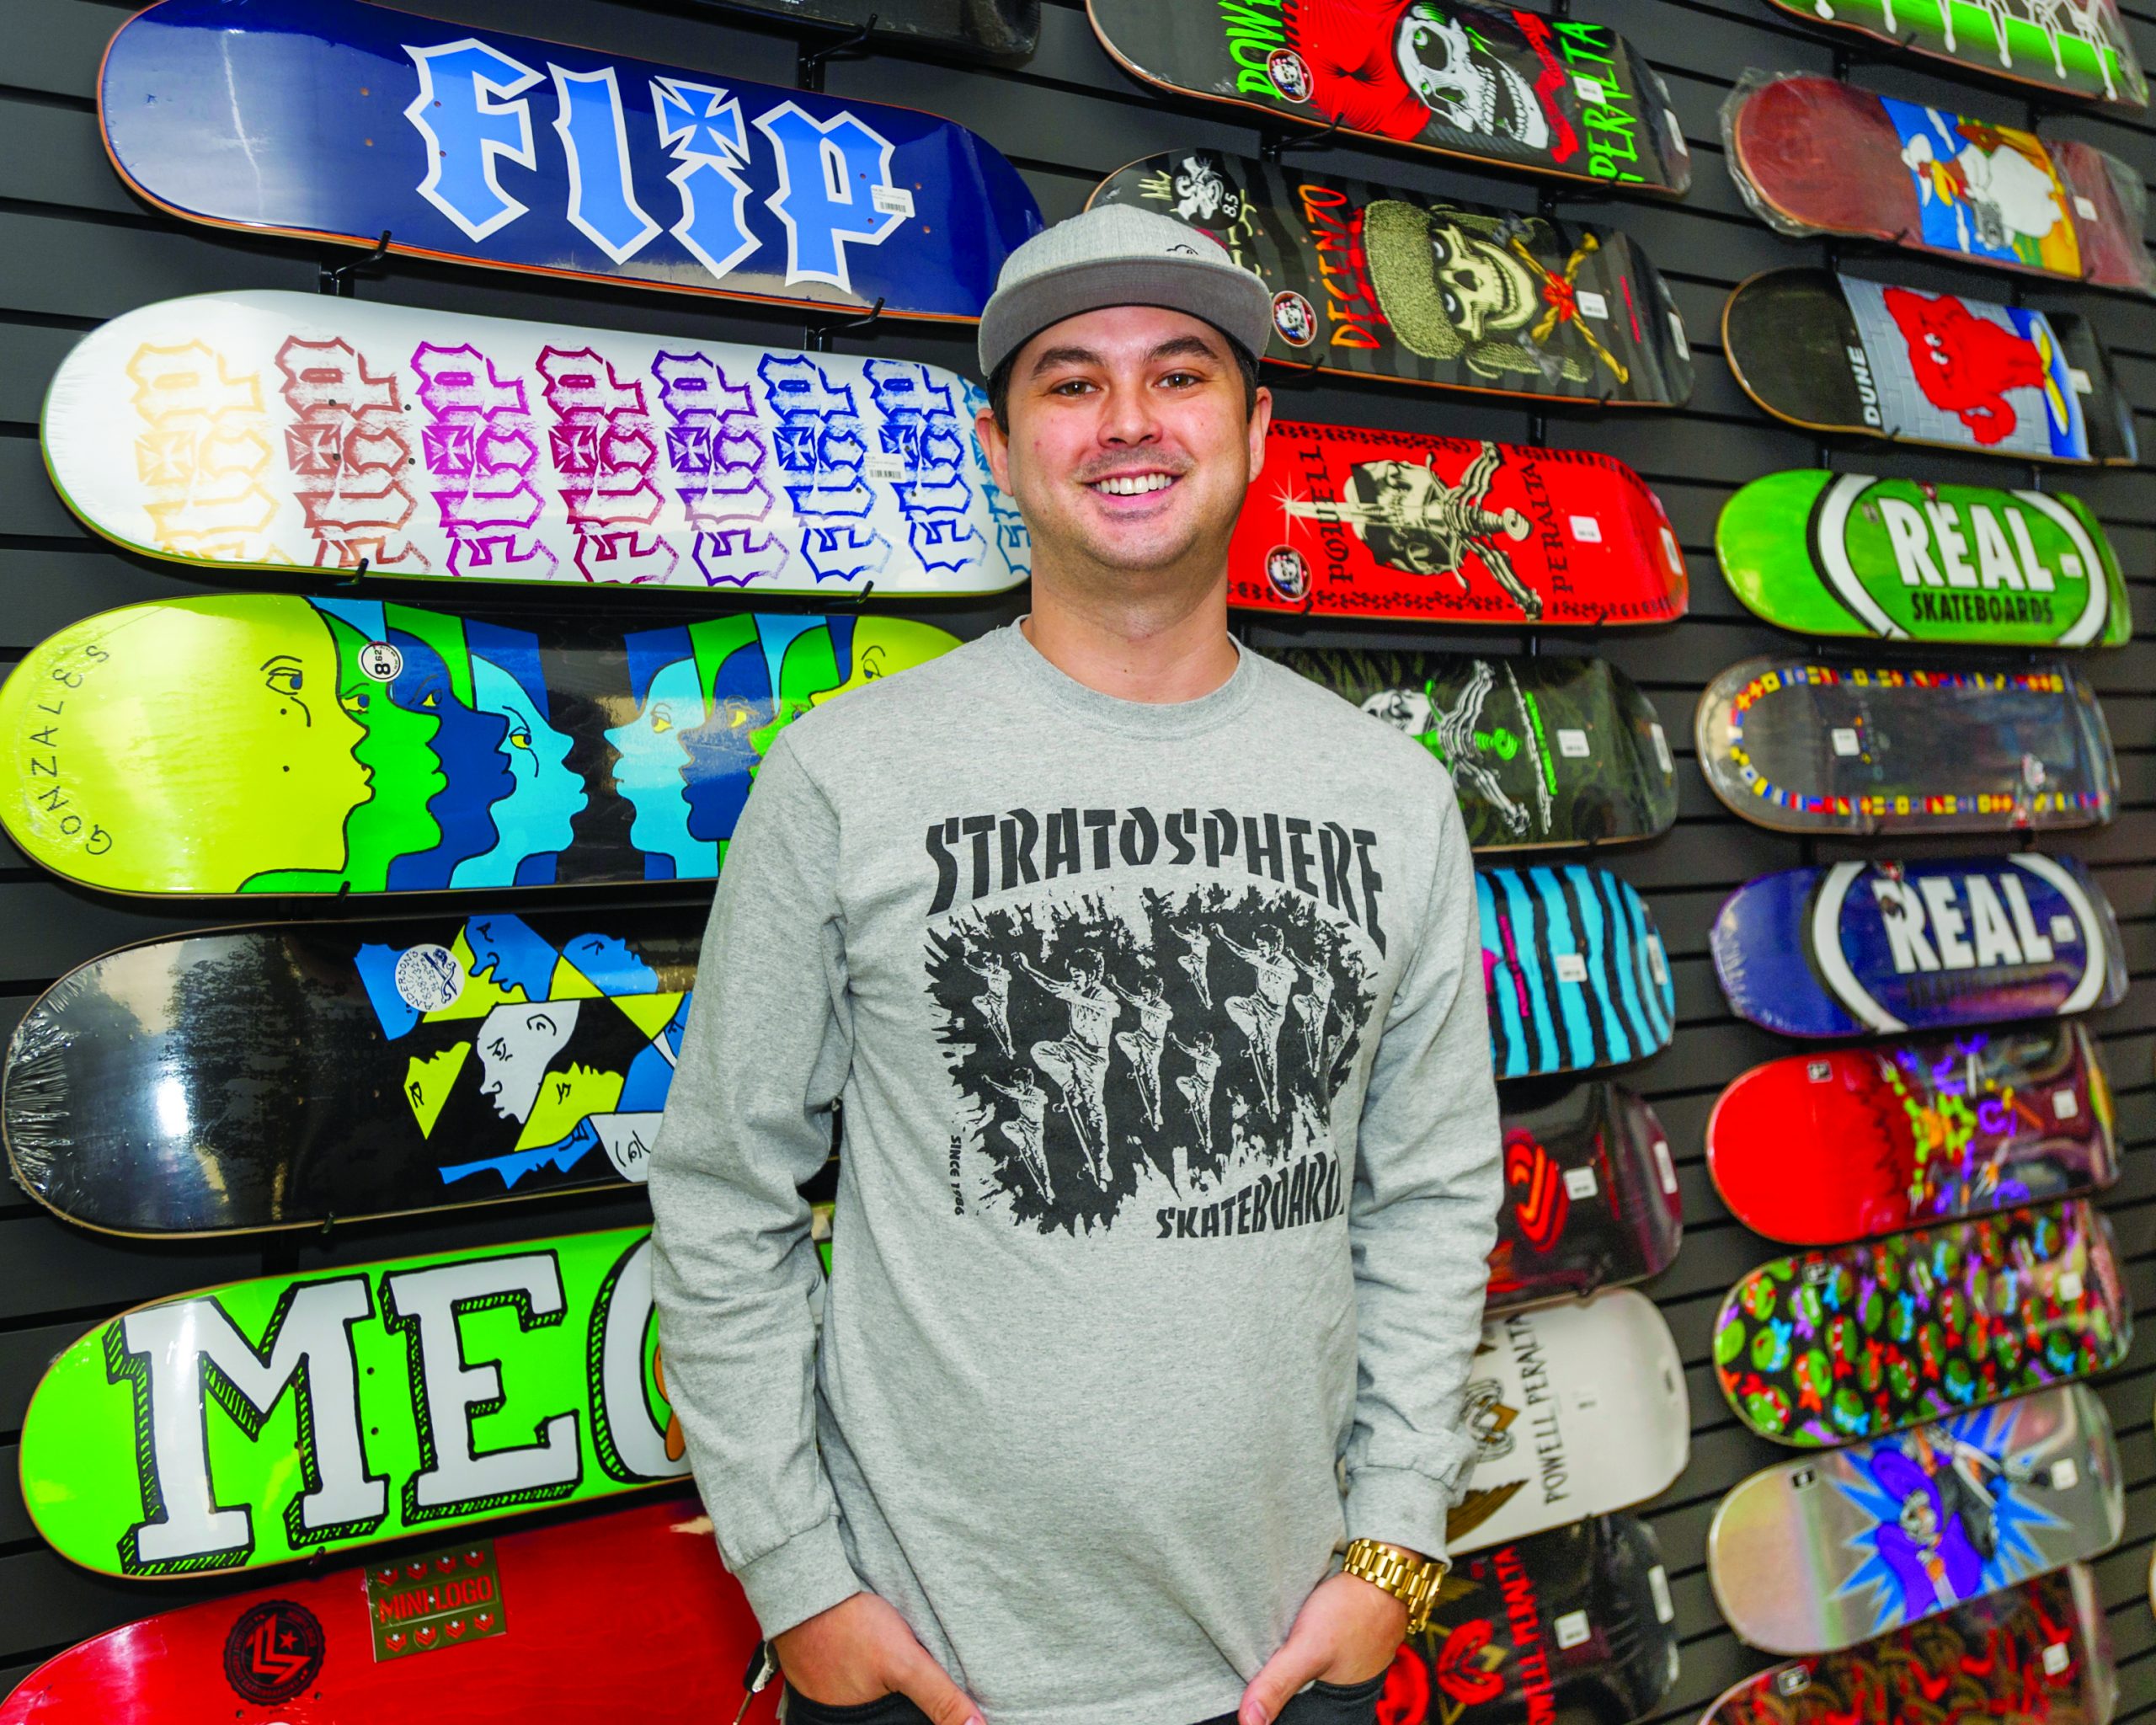 Latest in skateboard accessories, equipment can be found at  Opelika’s Boneyard Skateshop